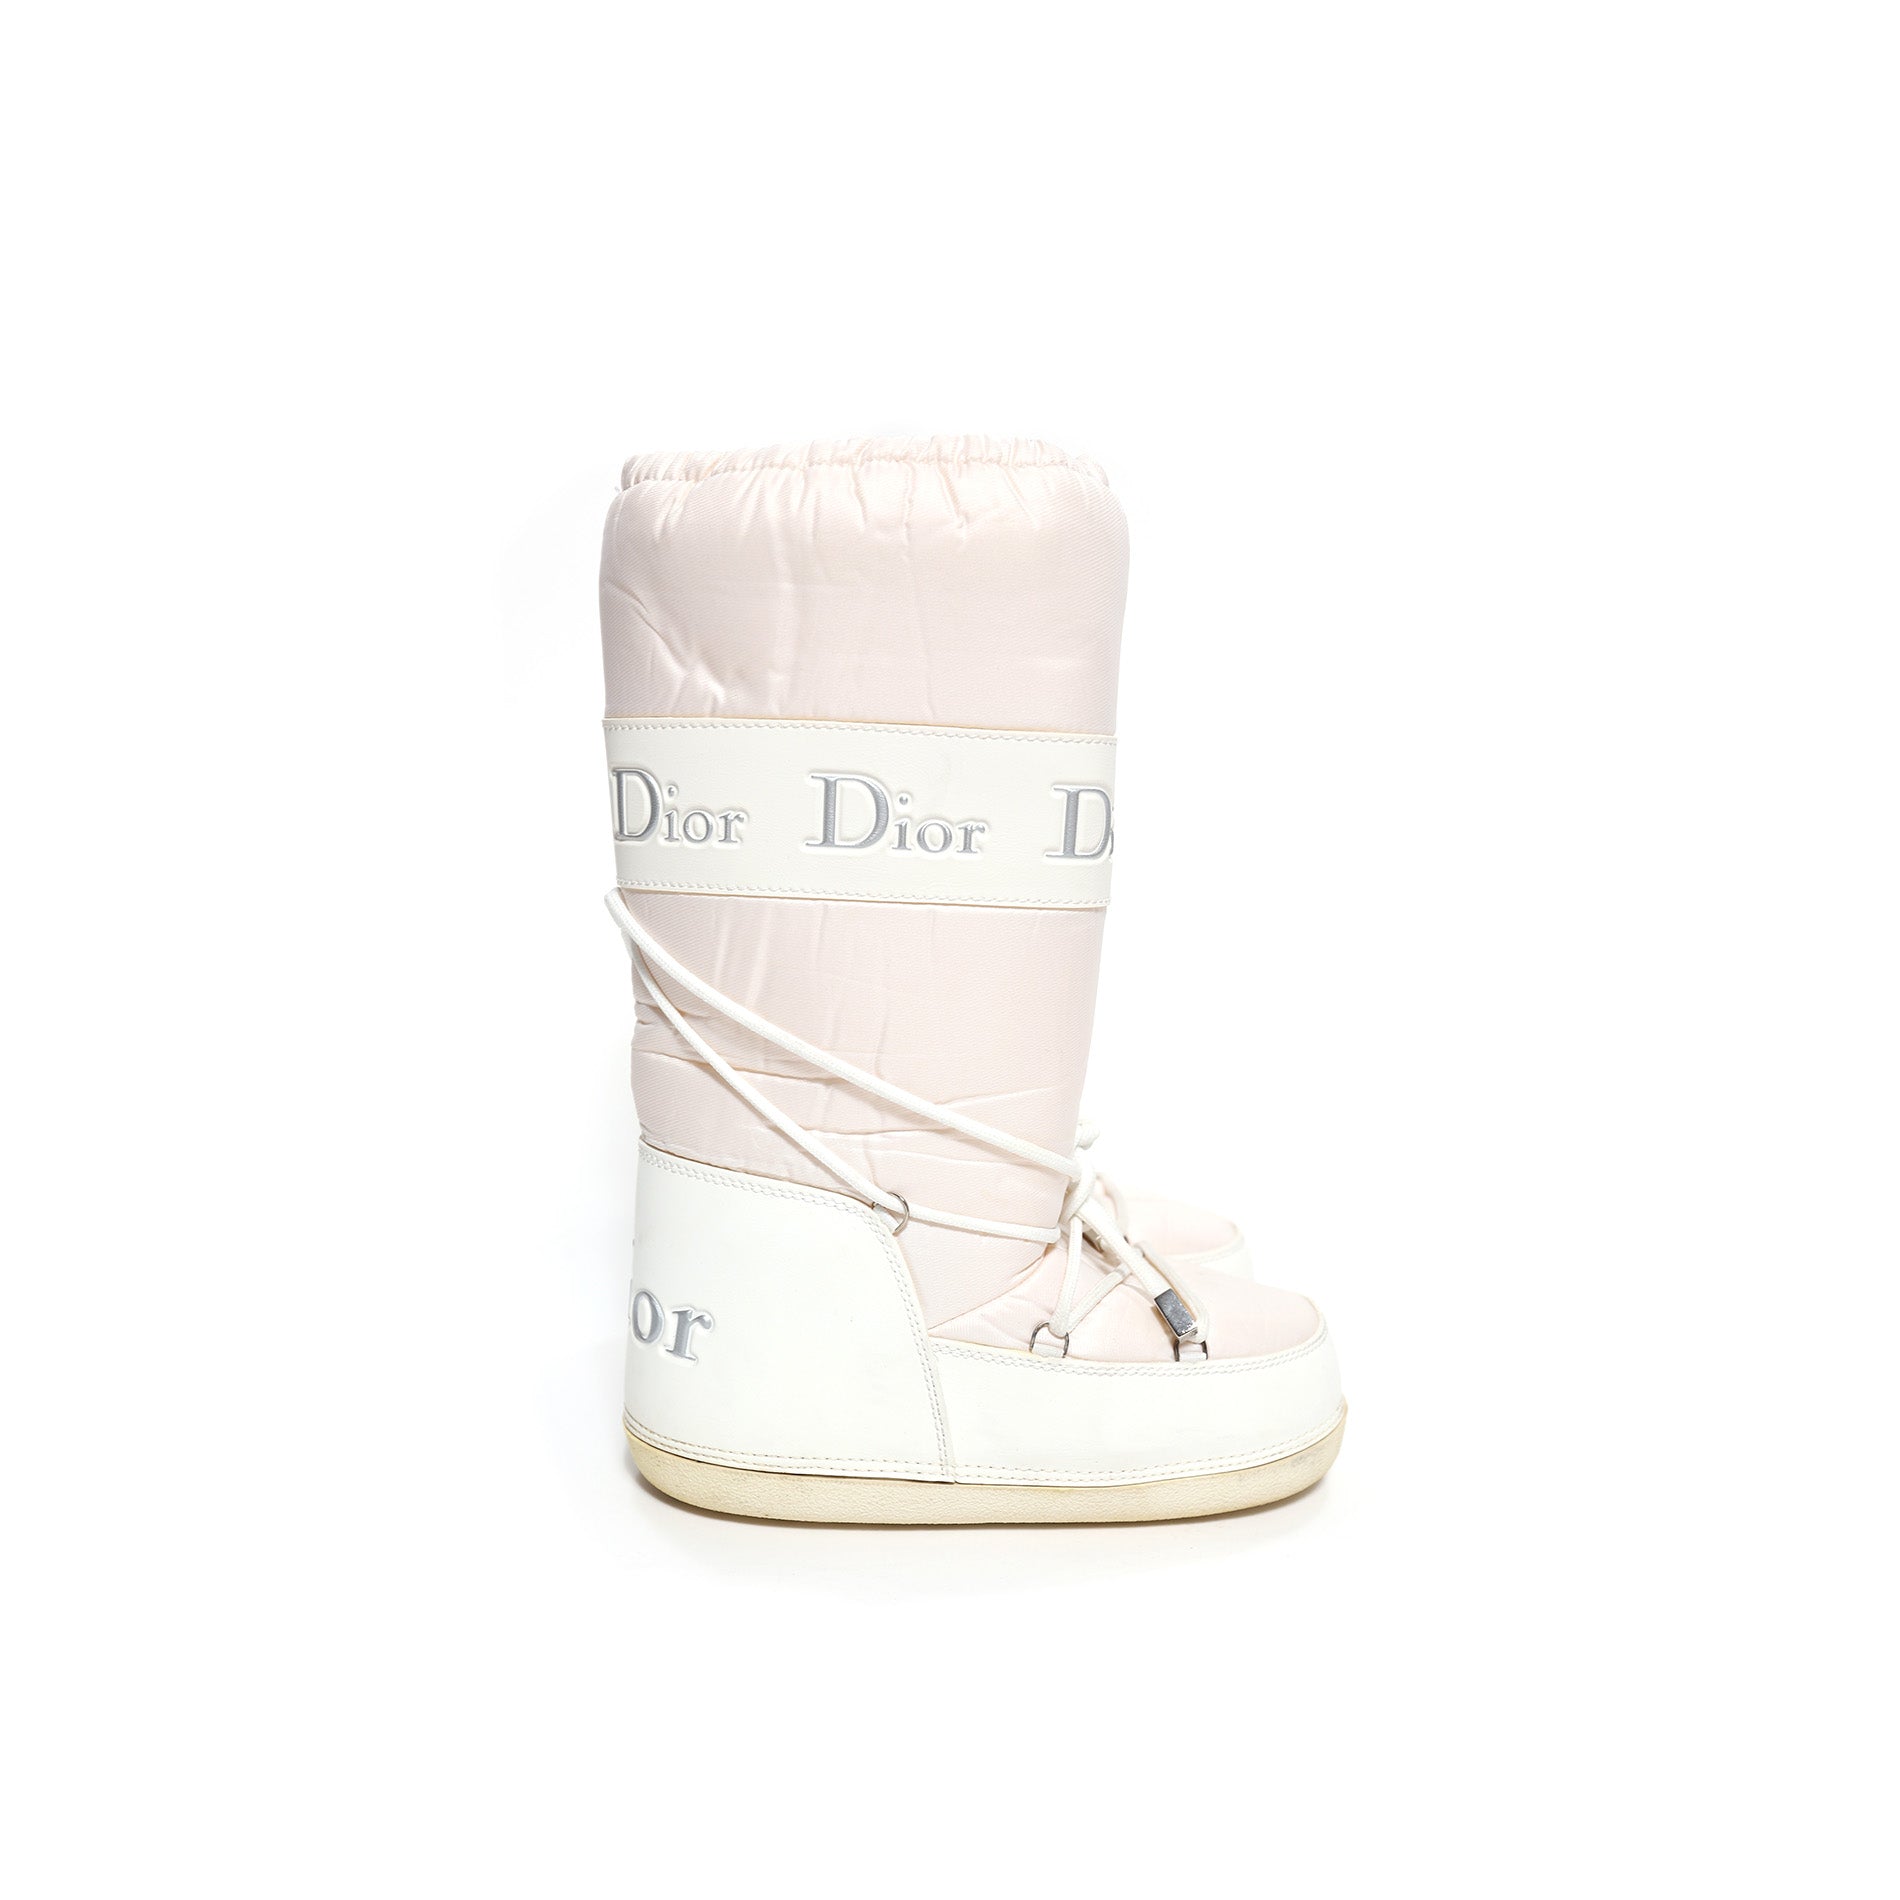 Christian Dior Early 2000s Moon Boots by John Galliano